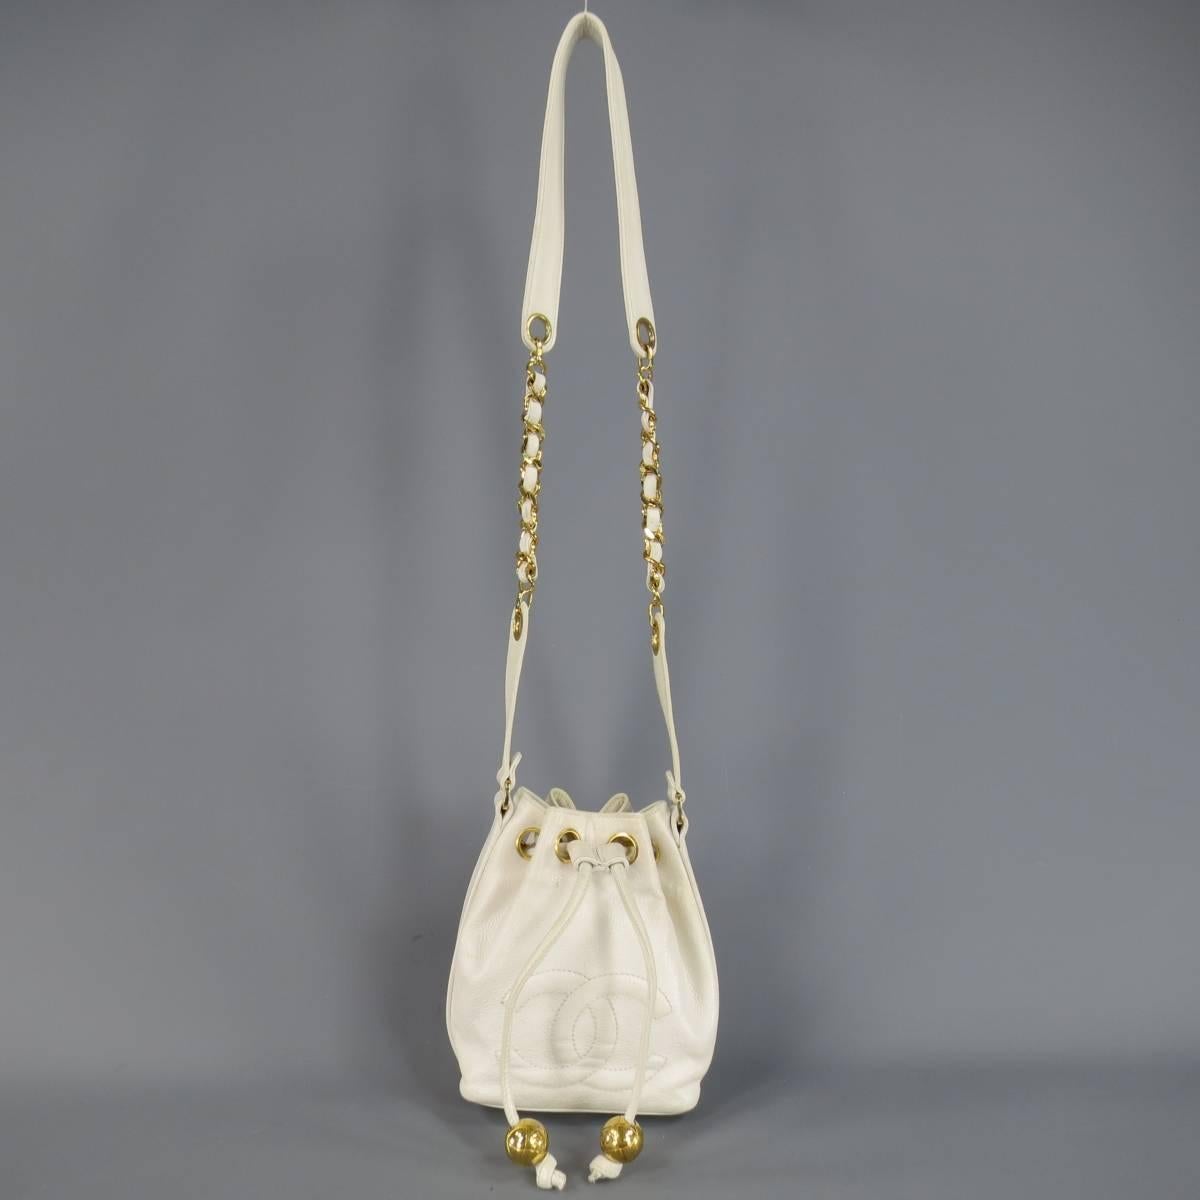 This fabulous 1980's vintage CHANEL mini bucket bag comes in white pebbled leather and features an oversized embroidered CC logo, drawstring closure with yellow gold tone grommets and braid textured beads, chain and leather shoulder strap and